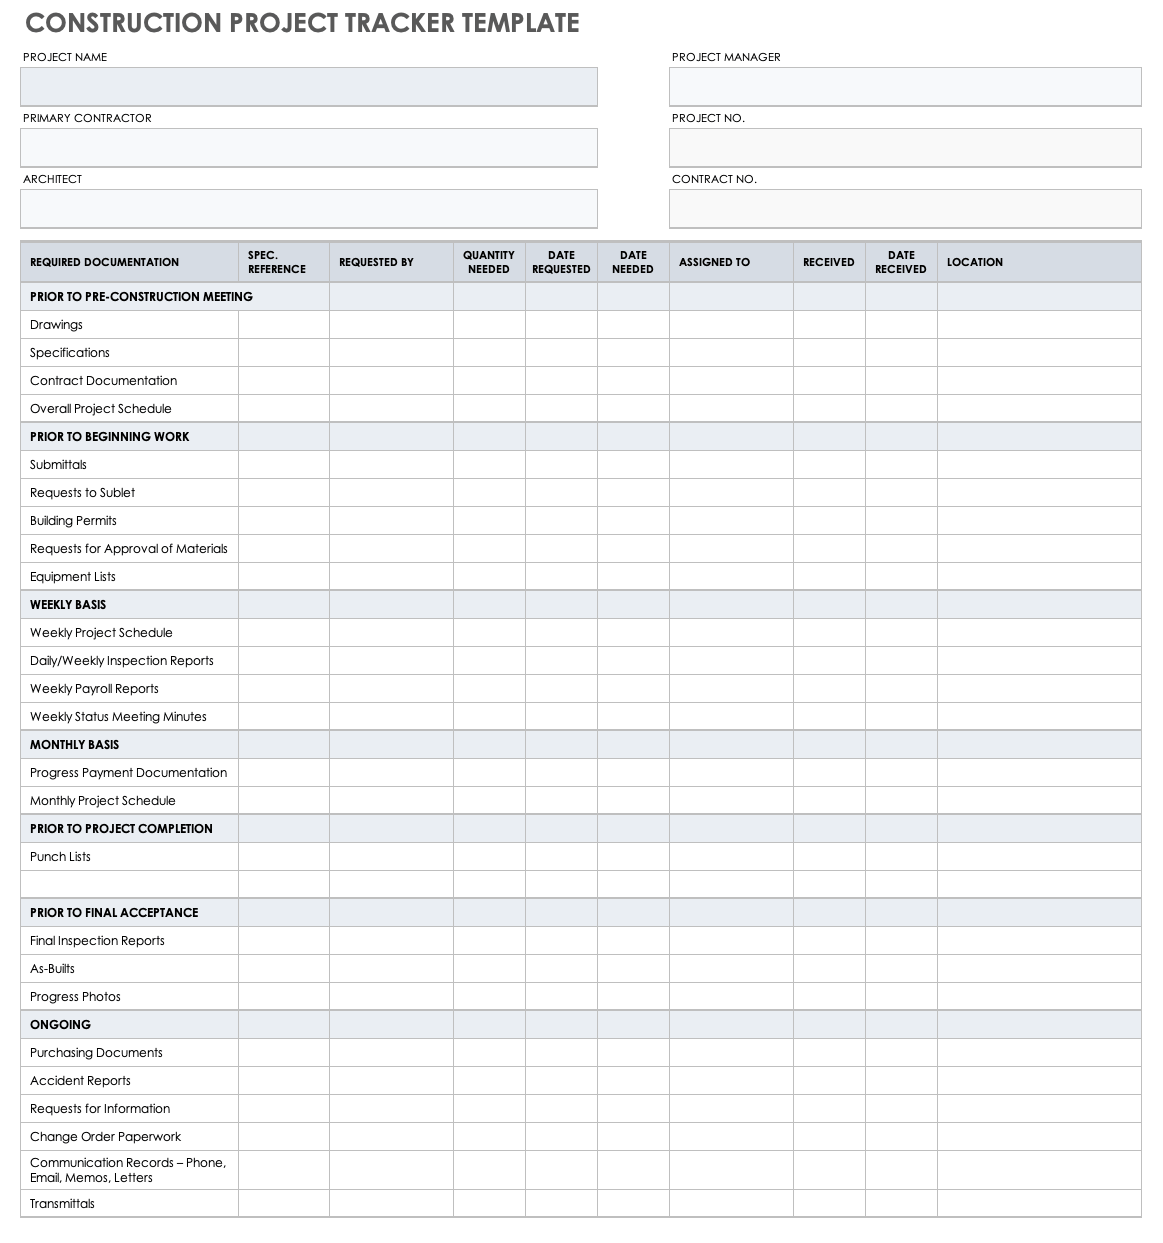 Construction Project Tracker Template